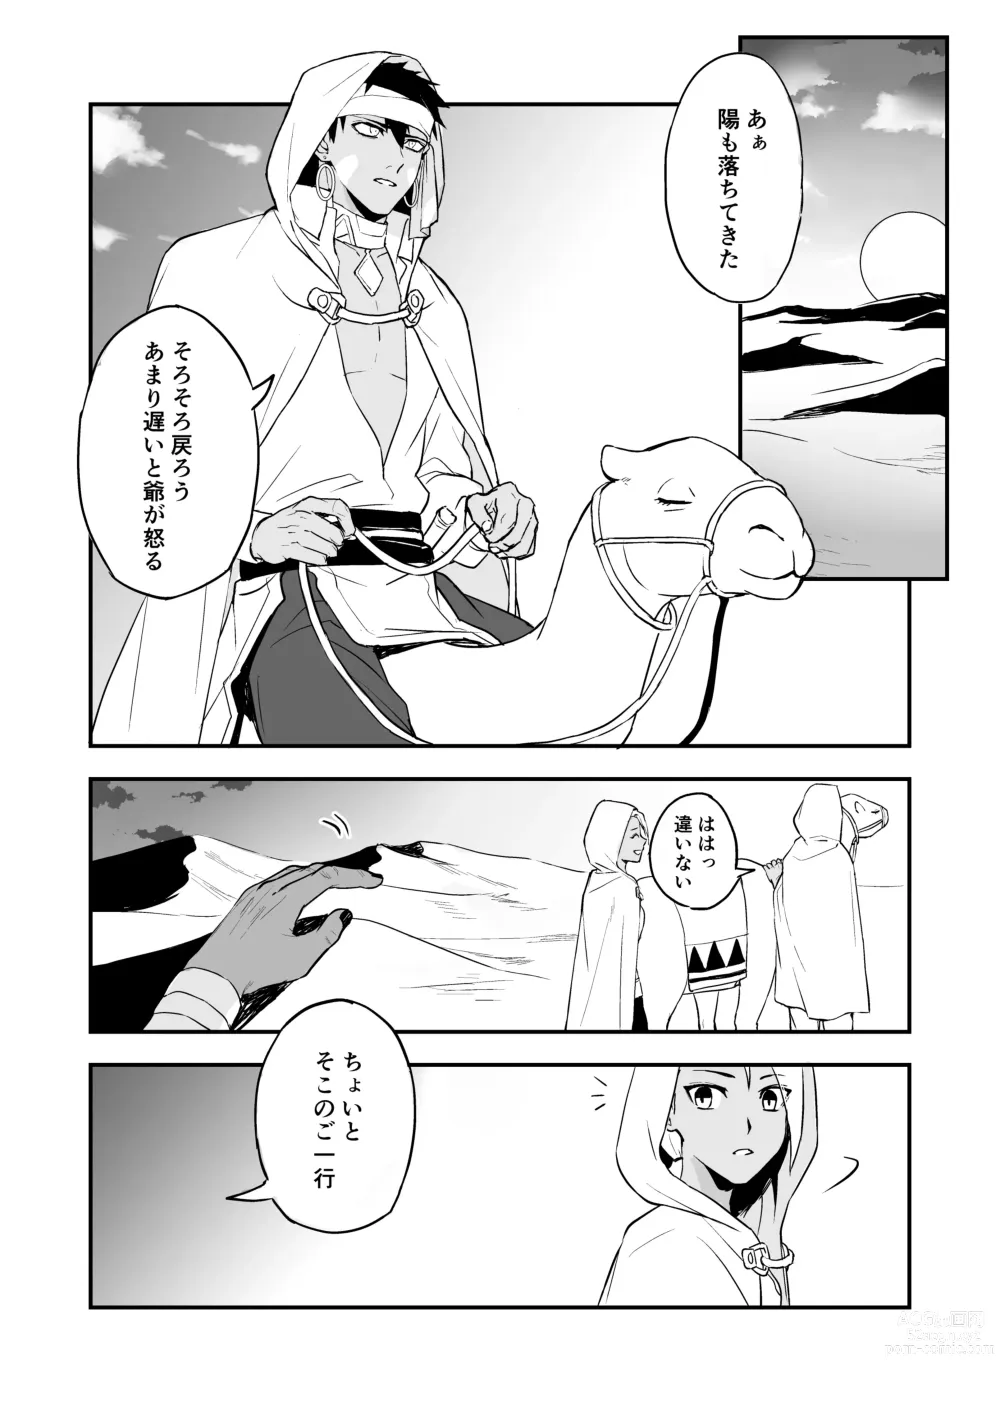 Page 5 of doujinshi INCUBUS LAMP